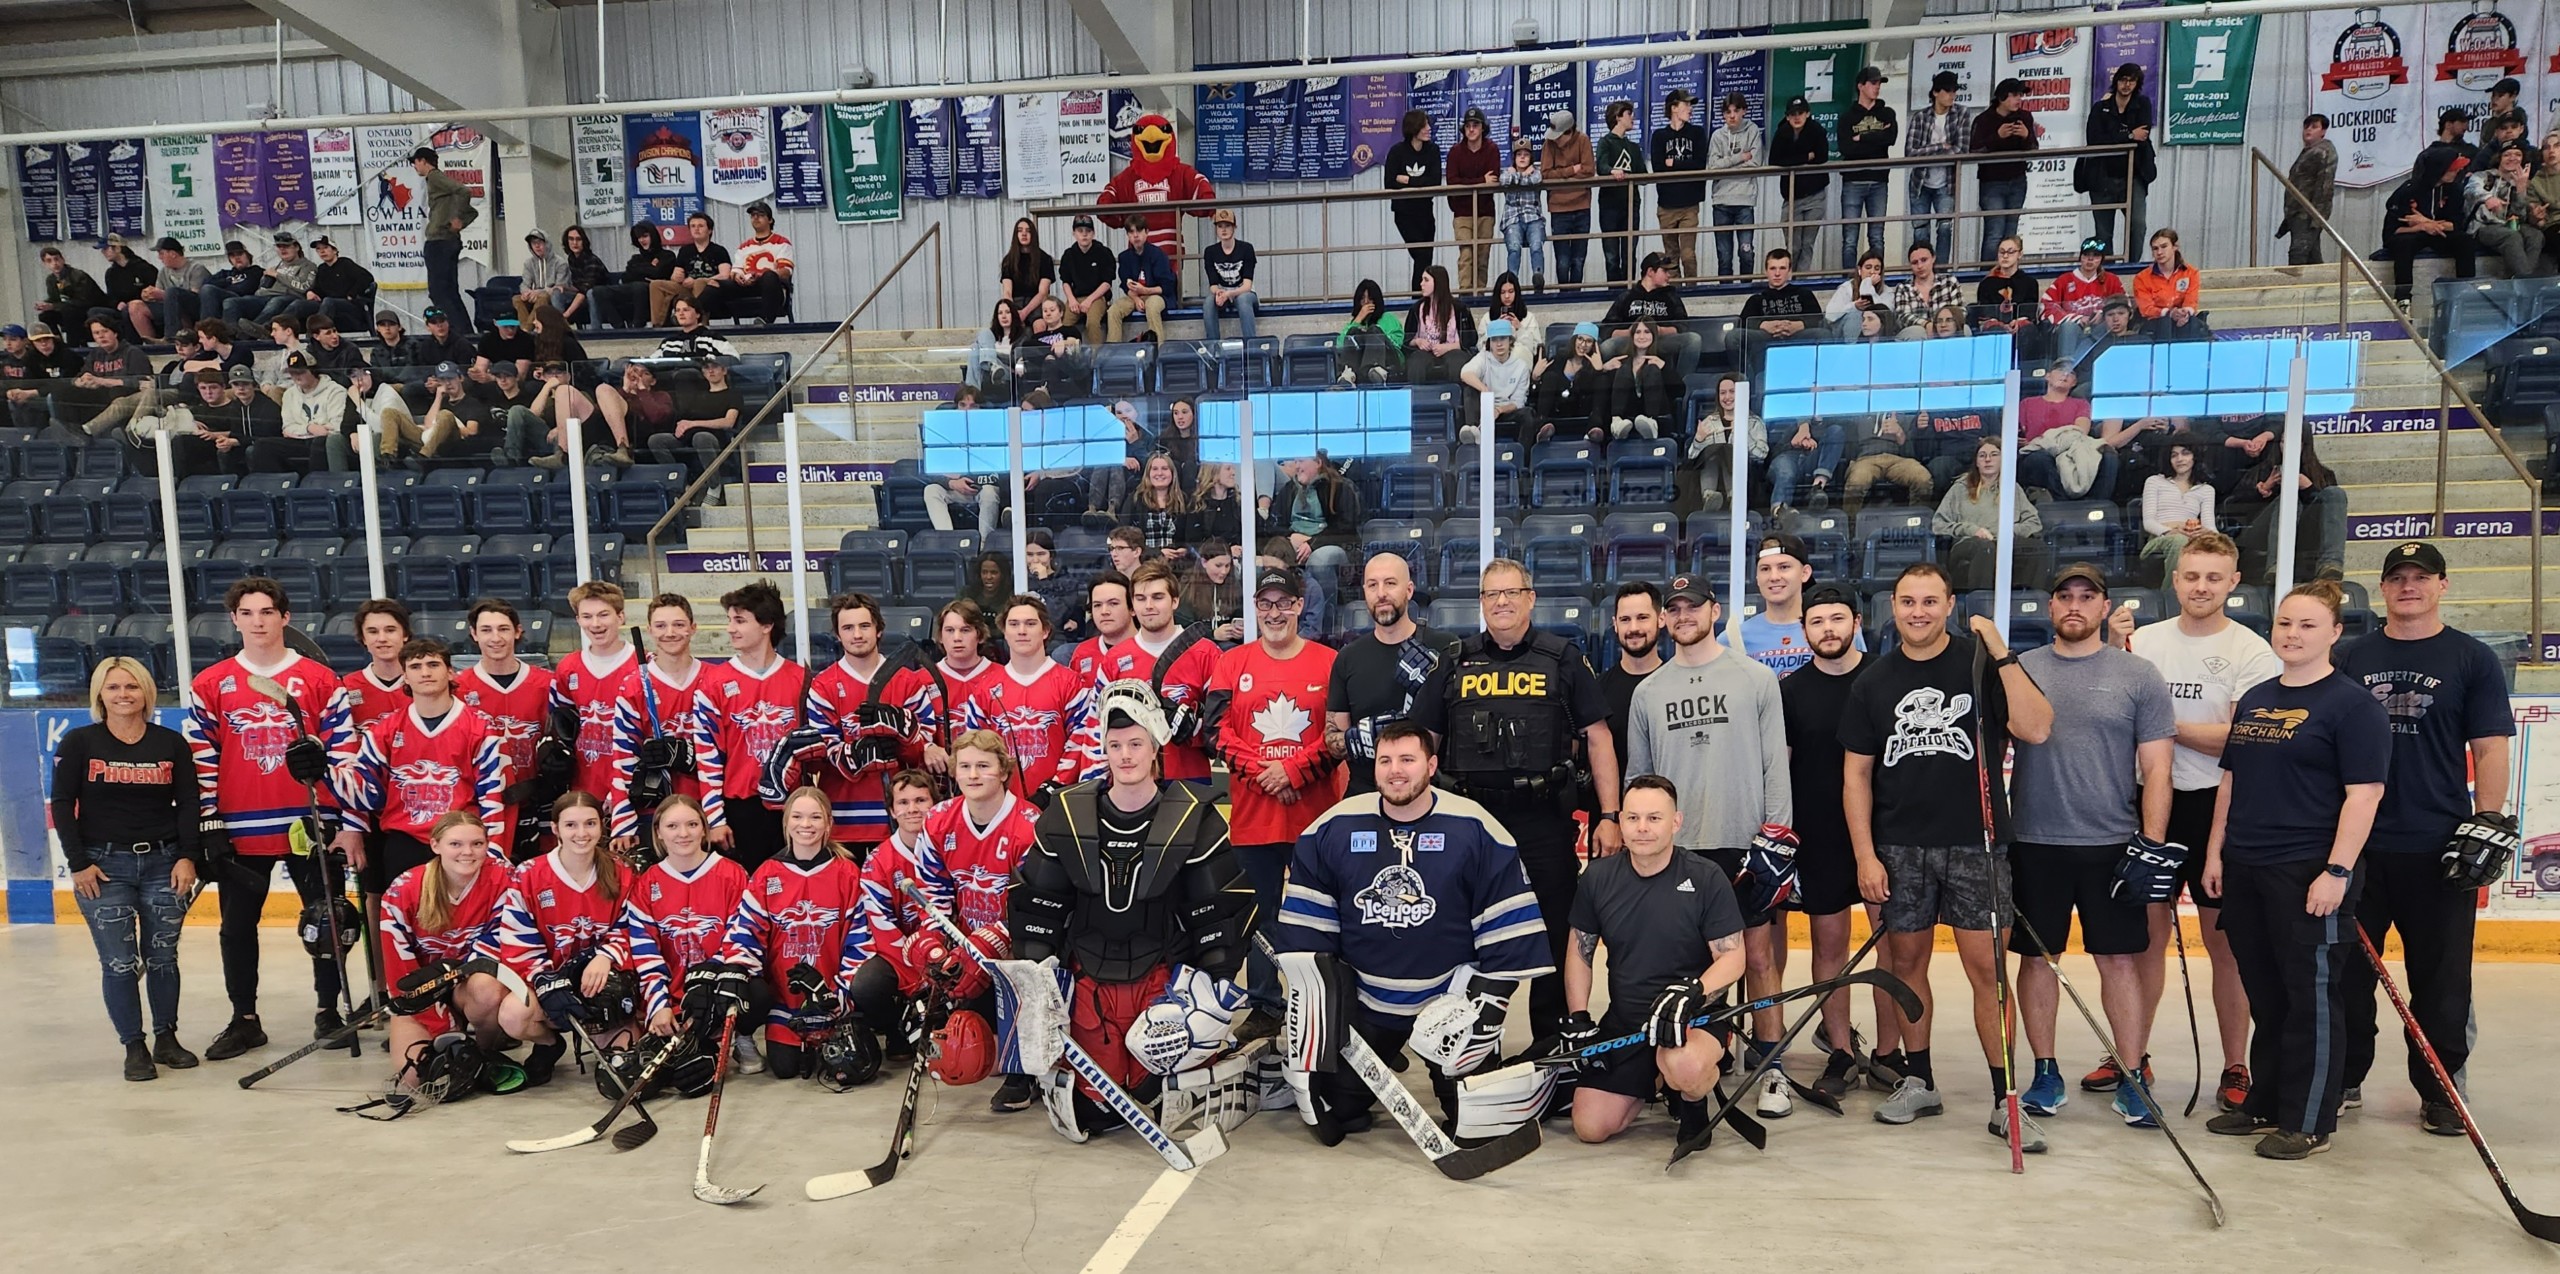 charity ball hockey game raises funds for local food bank scaled